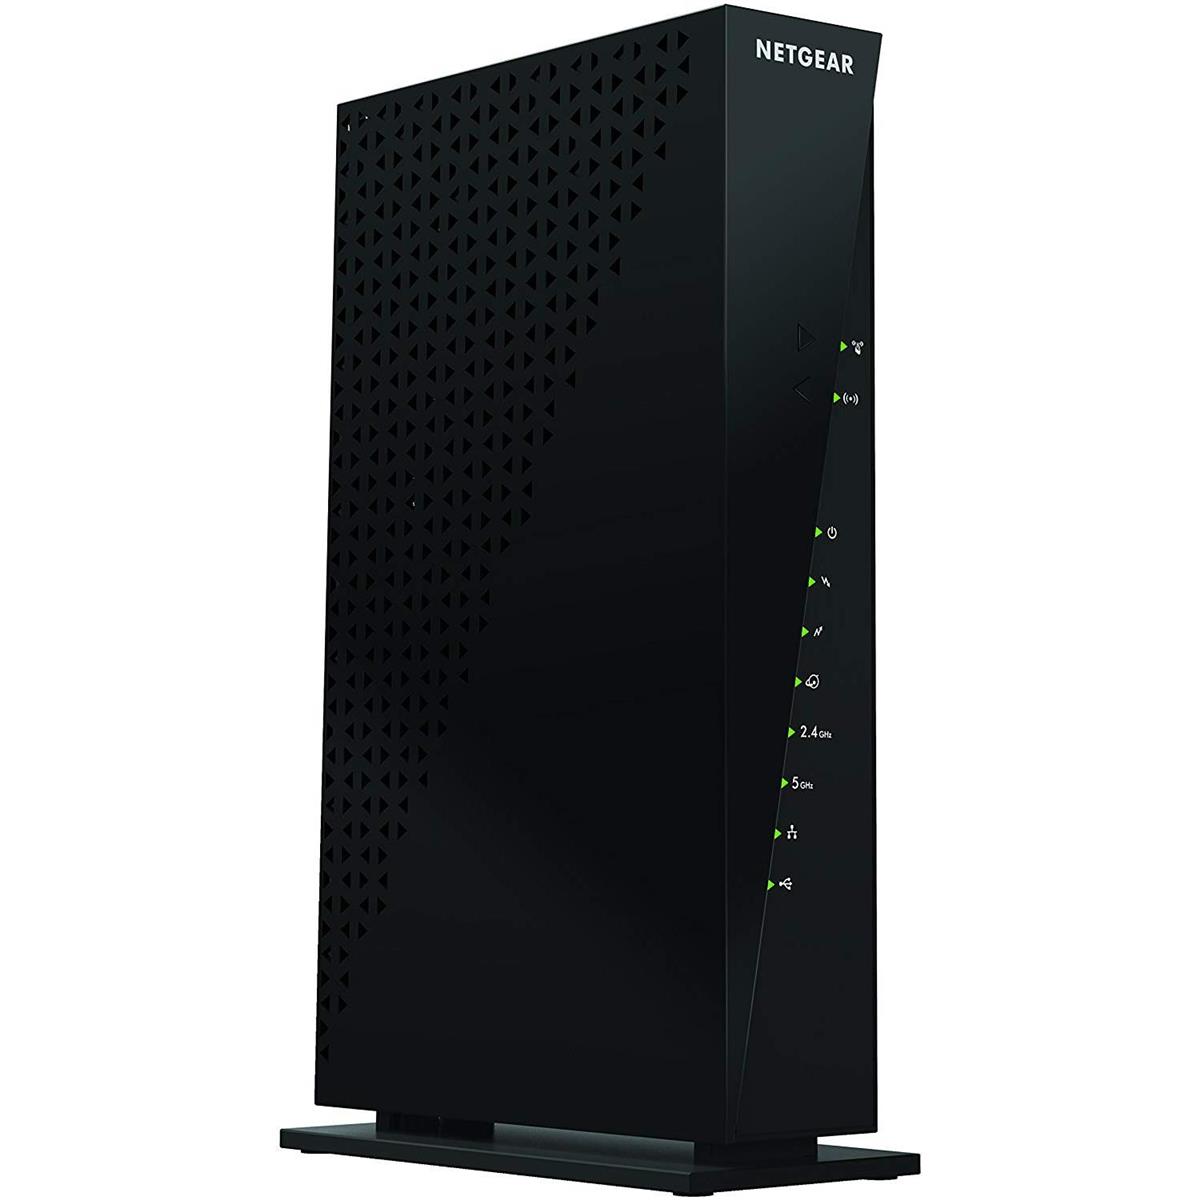 Image of Netgear C6300 AC1750 Wi-Fi Cable Modem Router